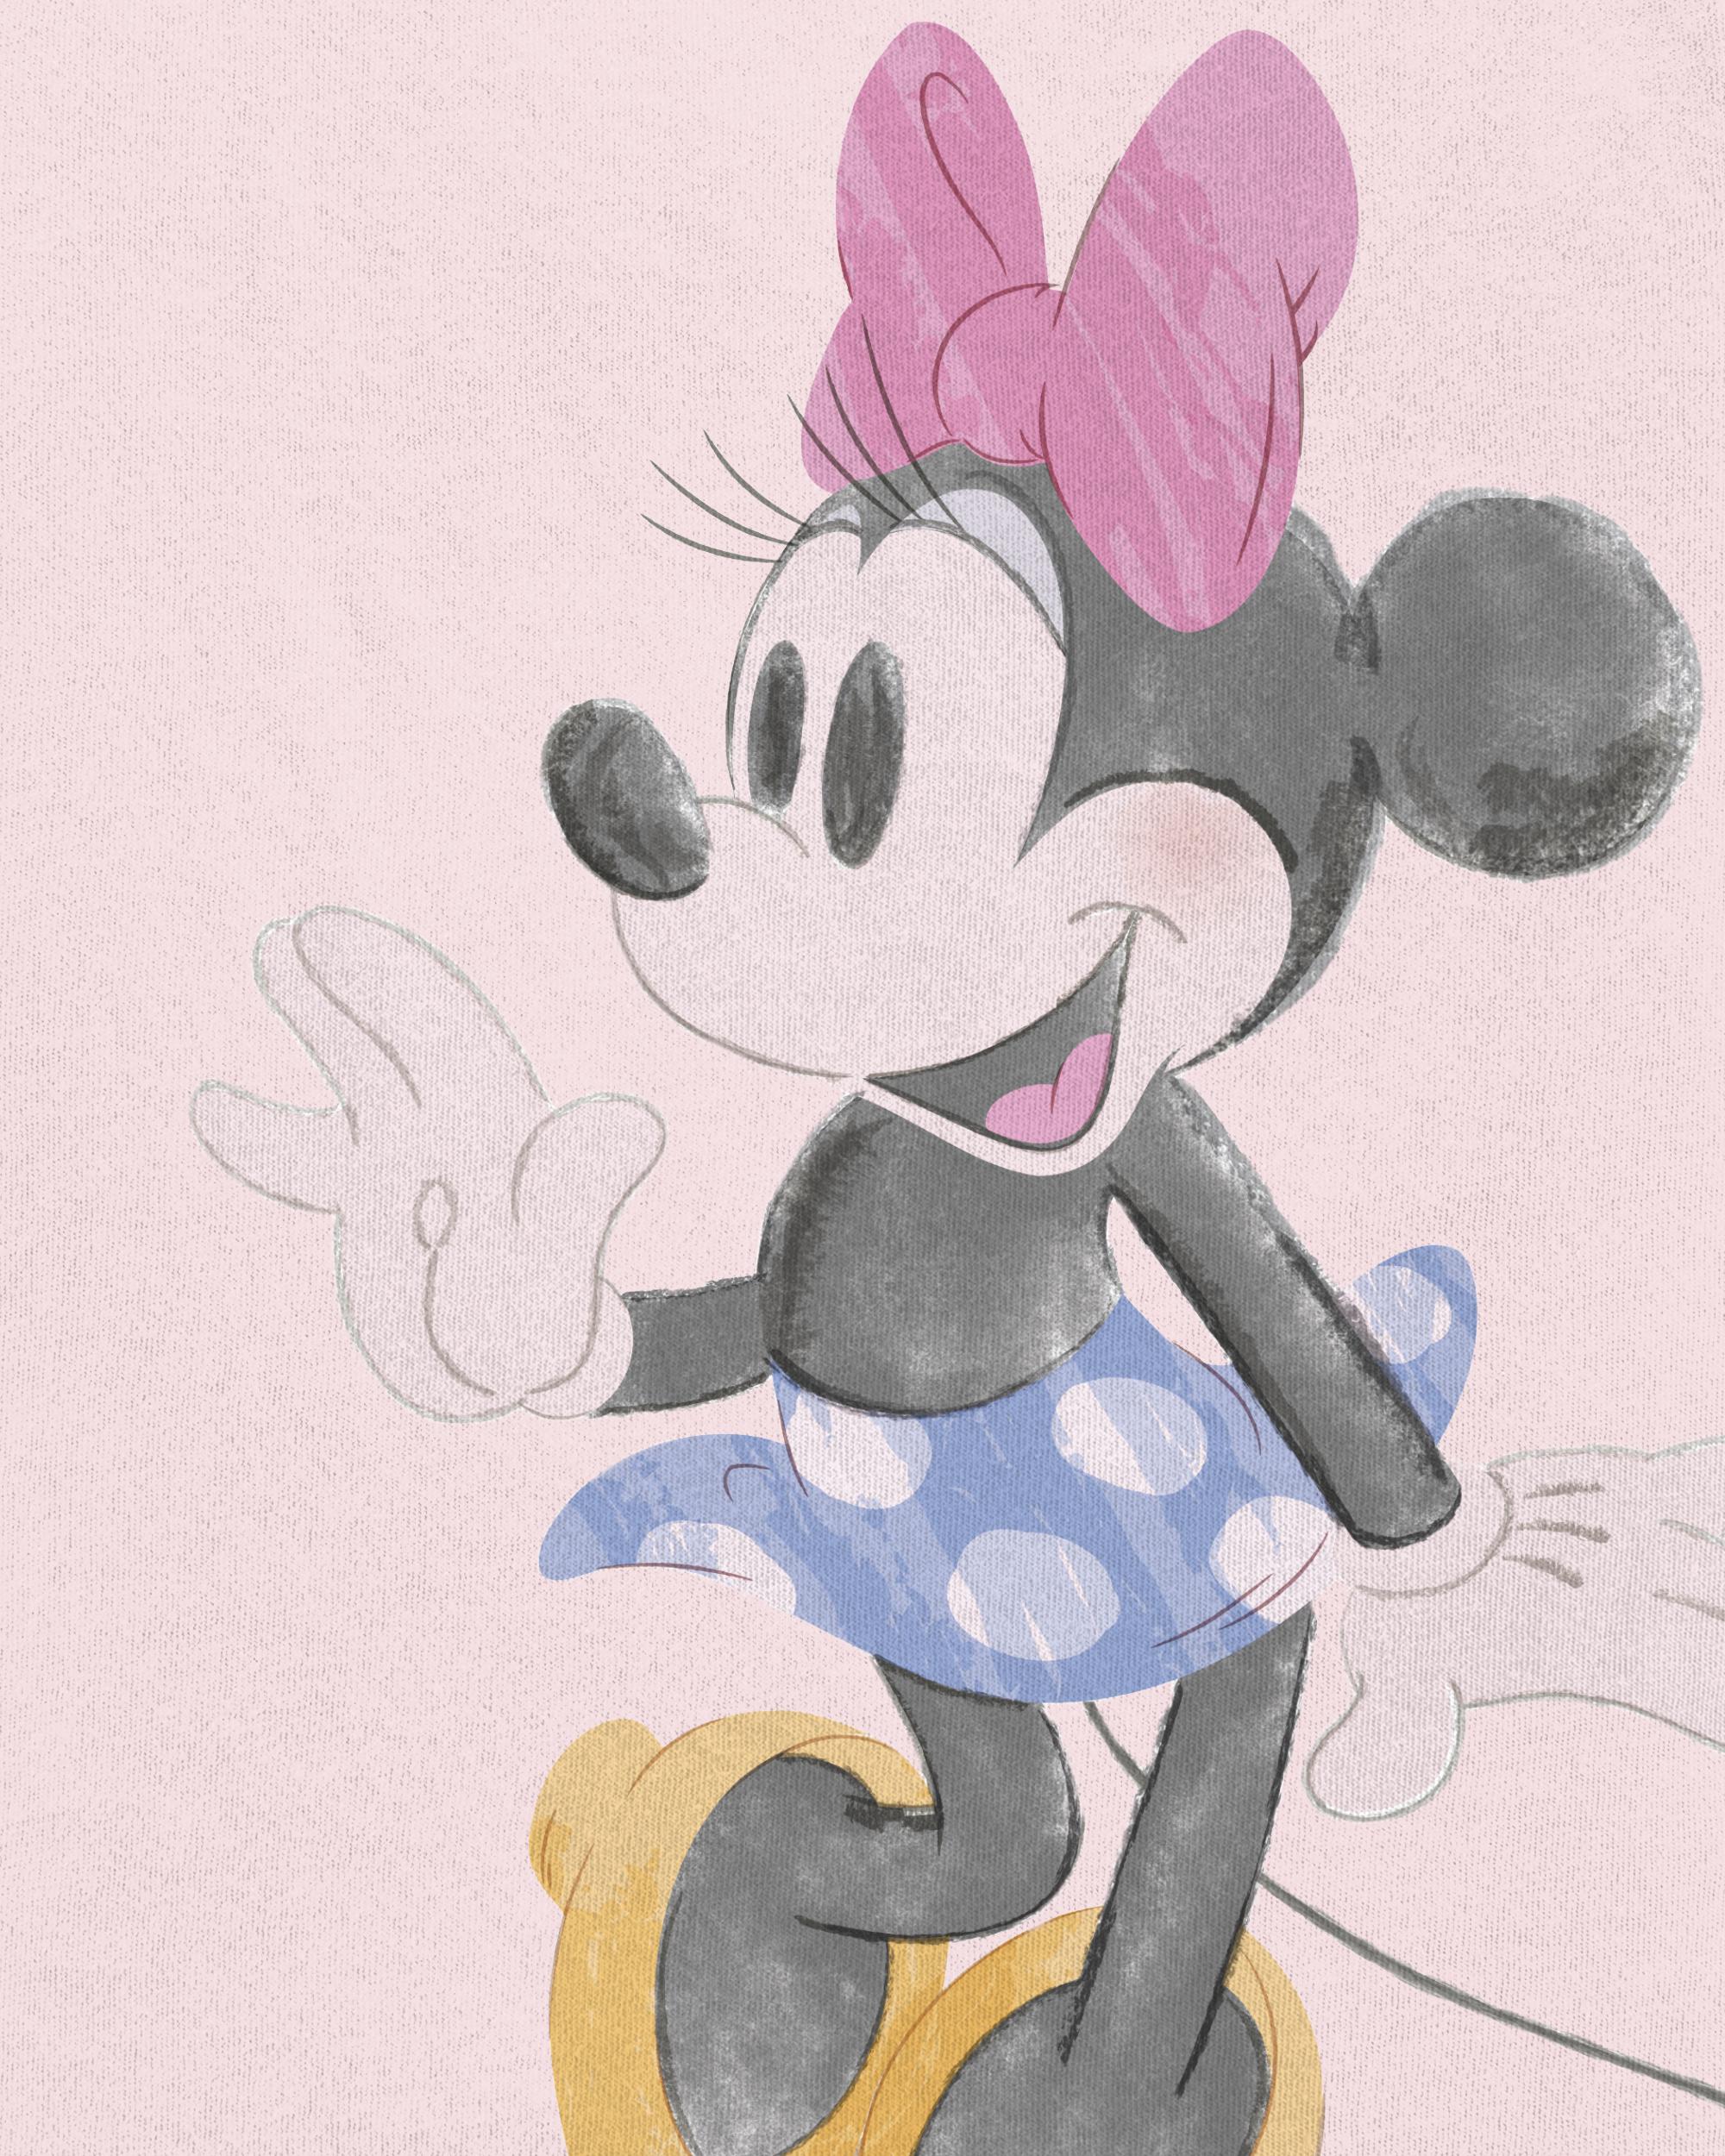 Toddler Minnie Mouse Tee